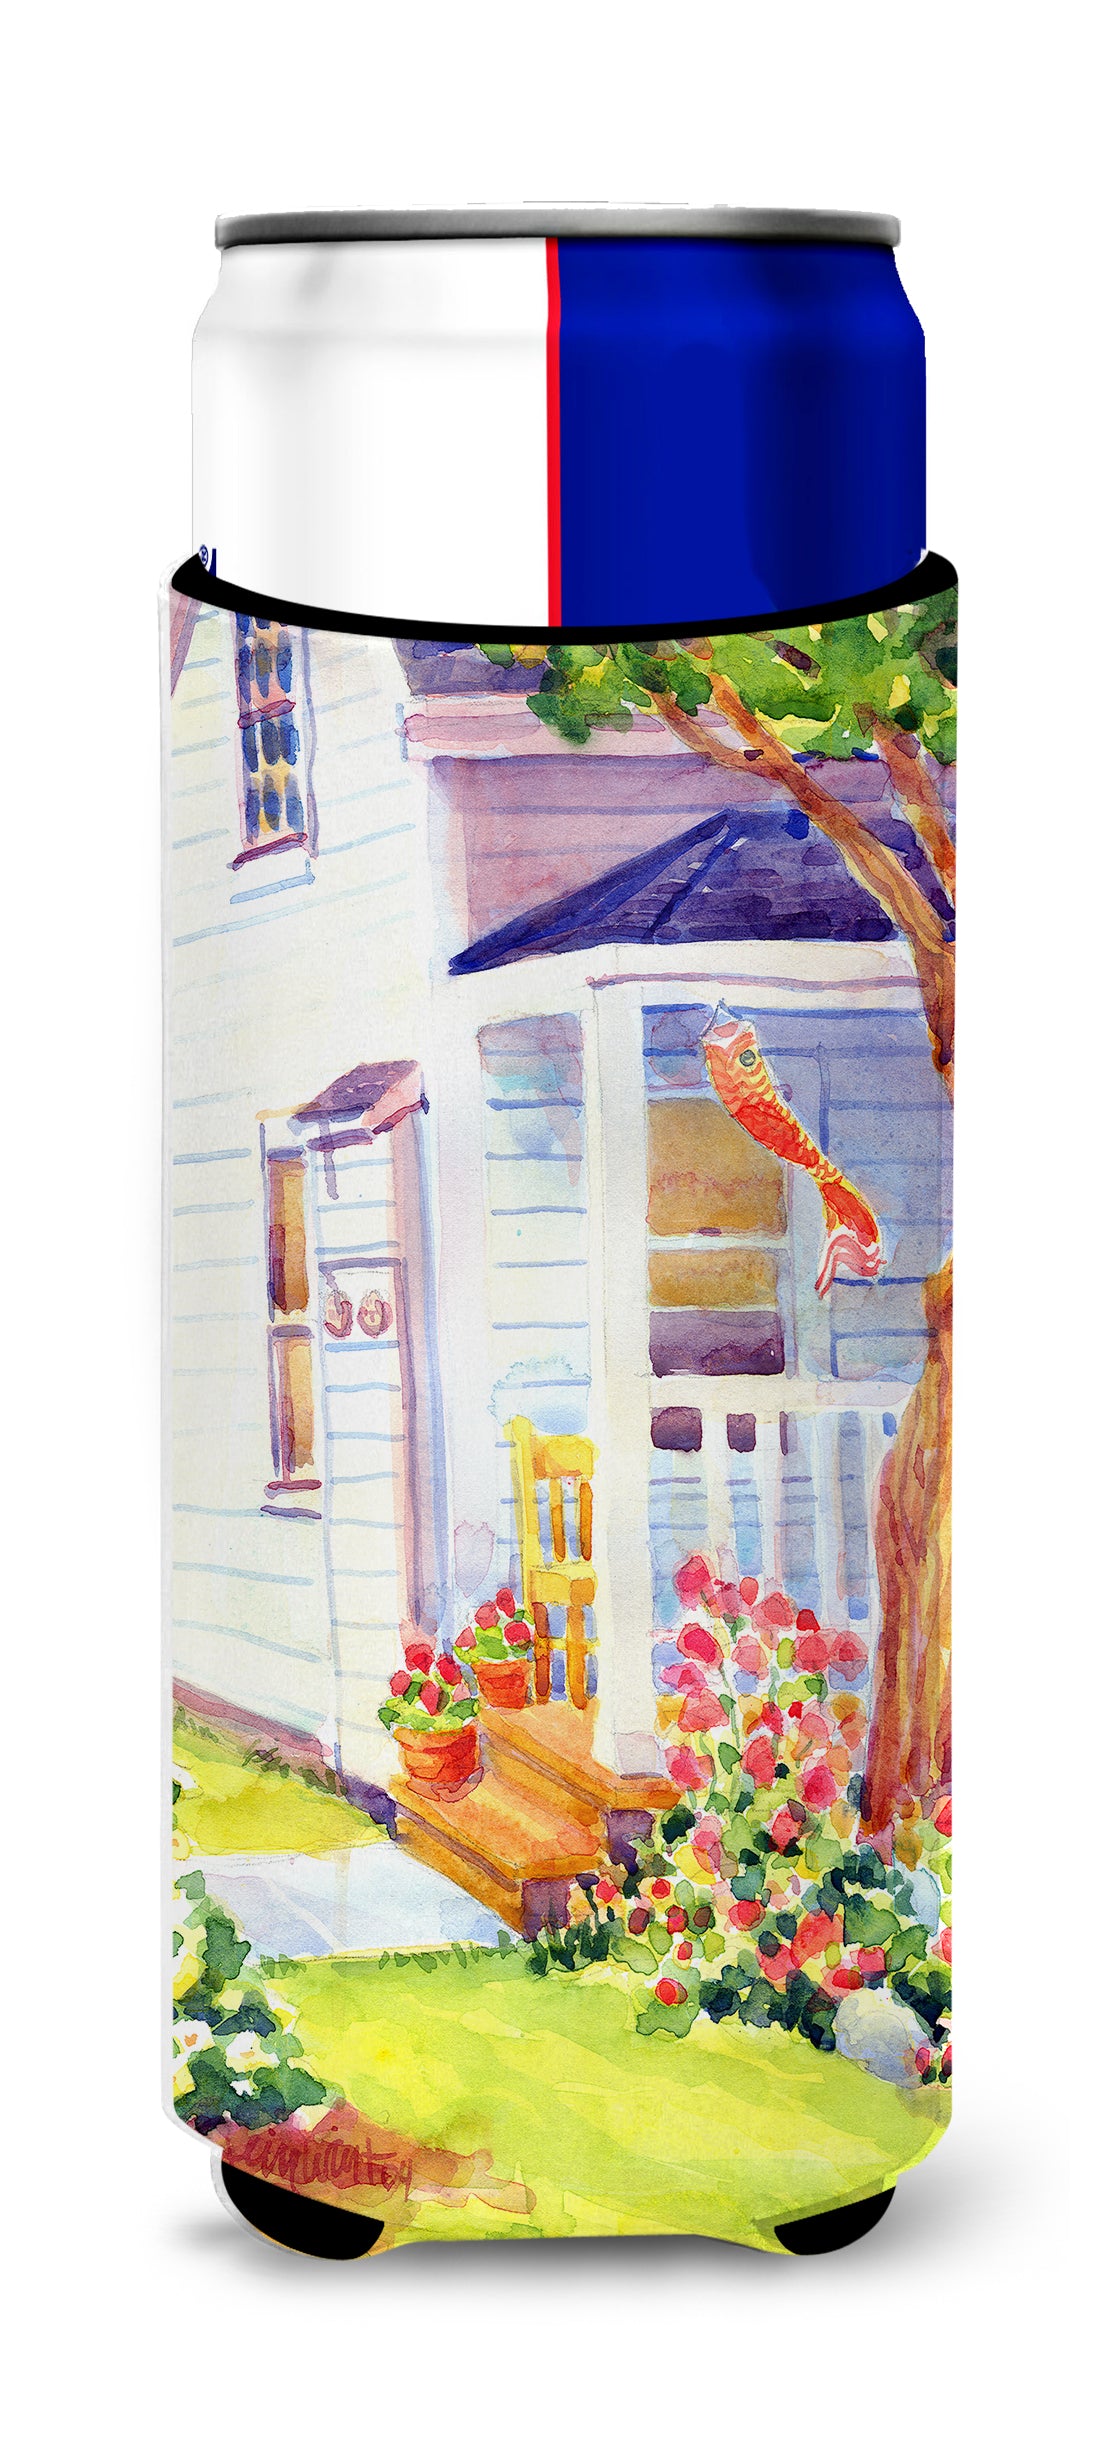 White Cottage at the beach Ultra Beverage Insulators for slim cans 6040MUK